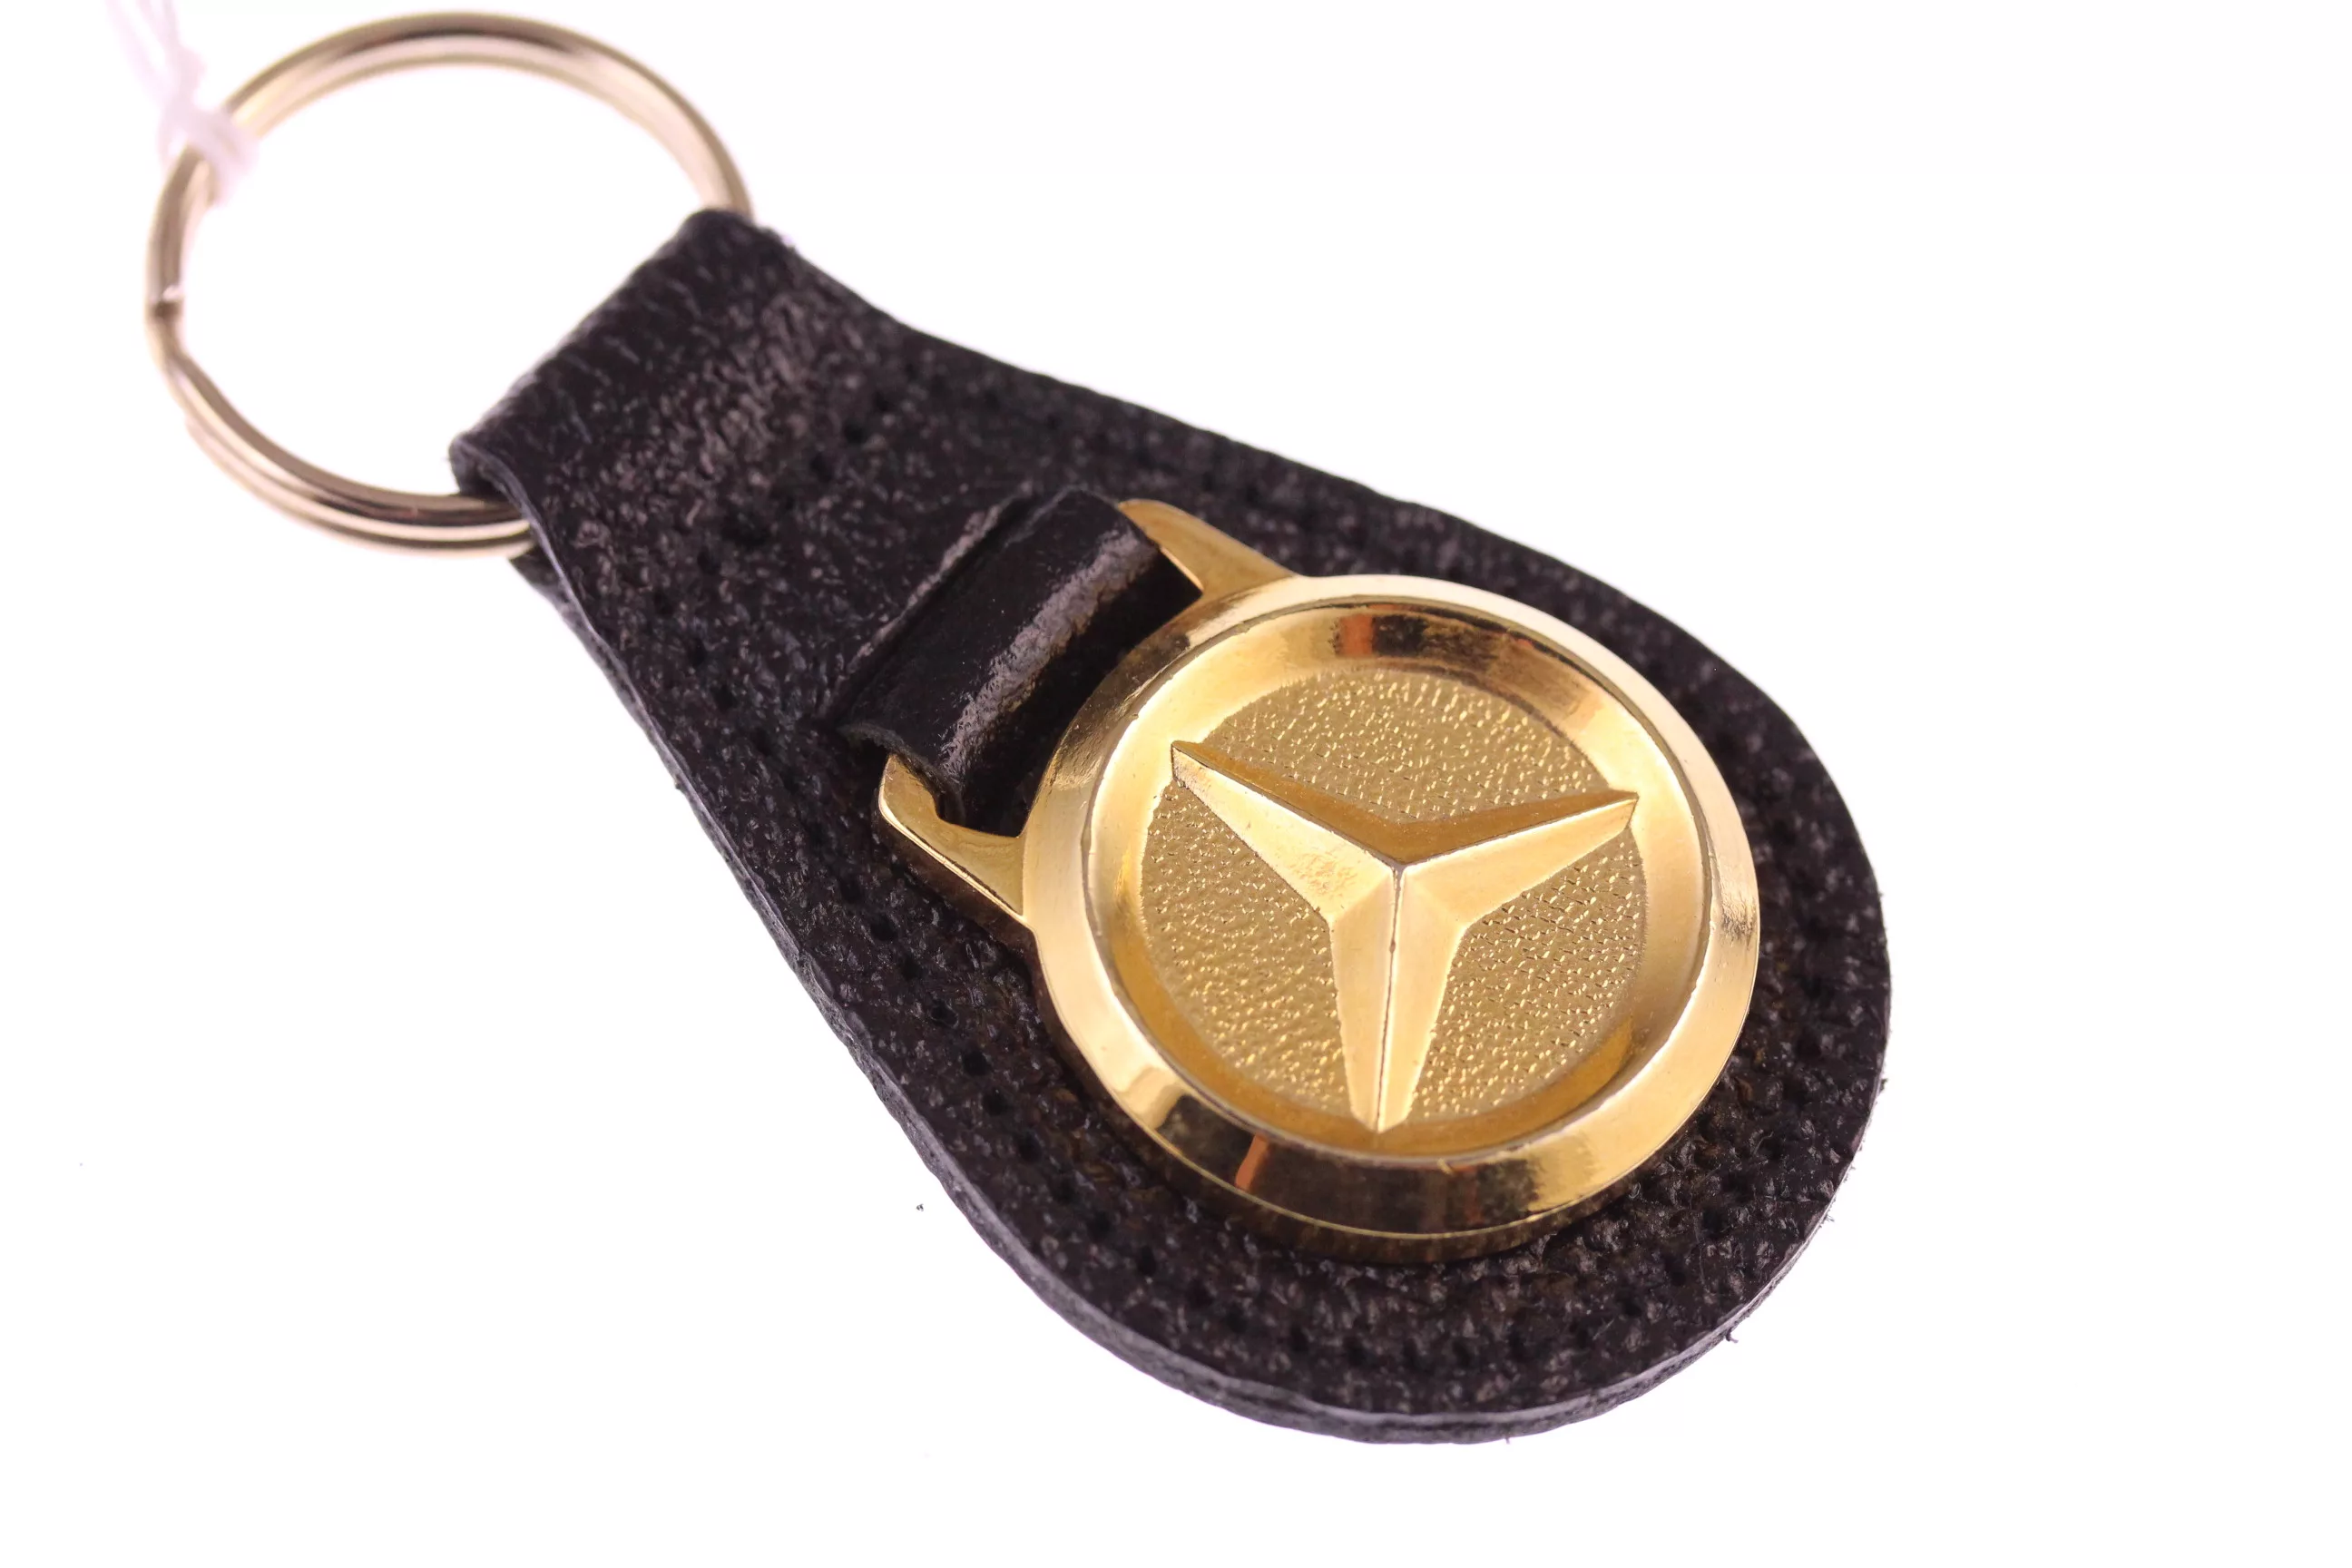 UBER RARE! Exceptional Vintage Classic Mercedes Benz Key Chain in